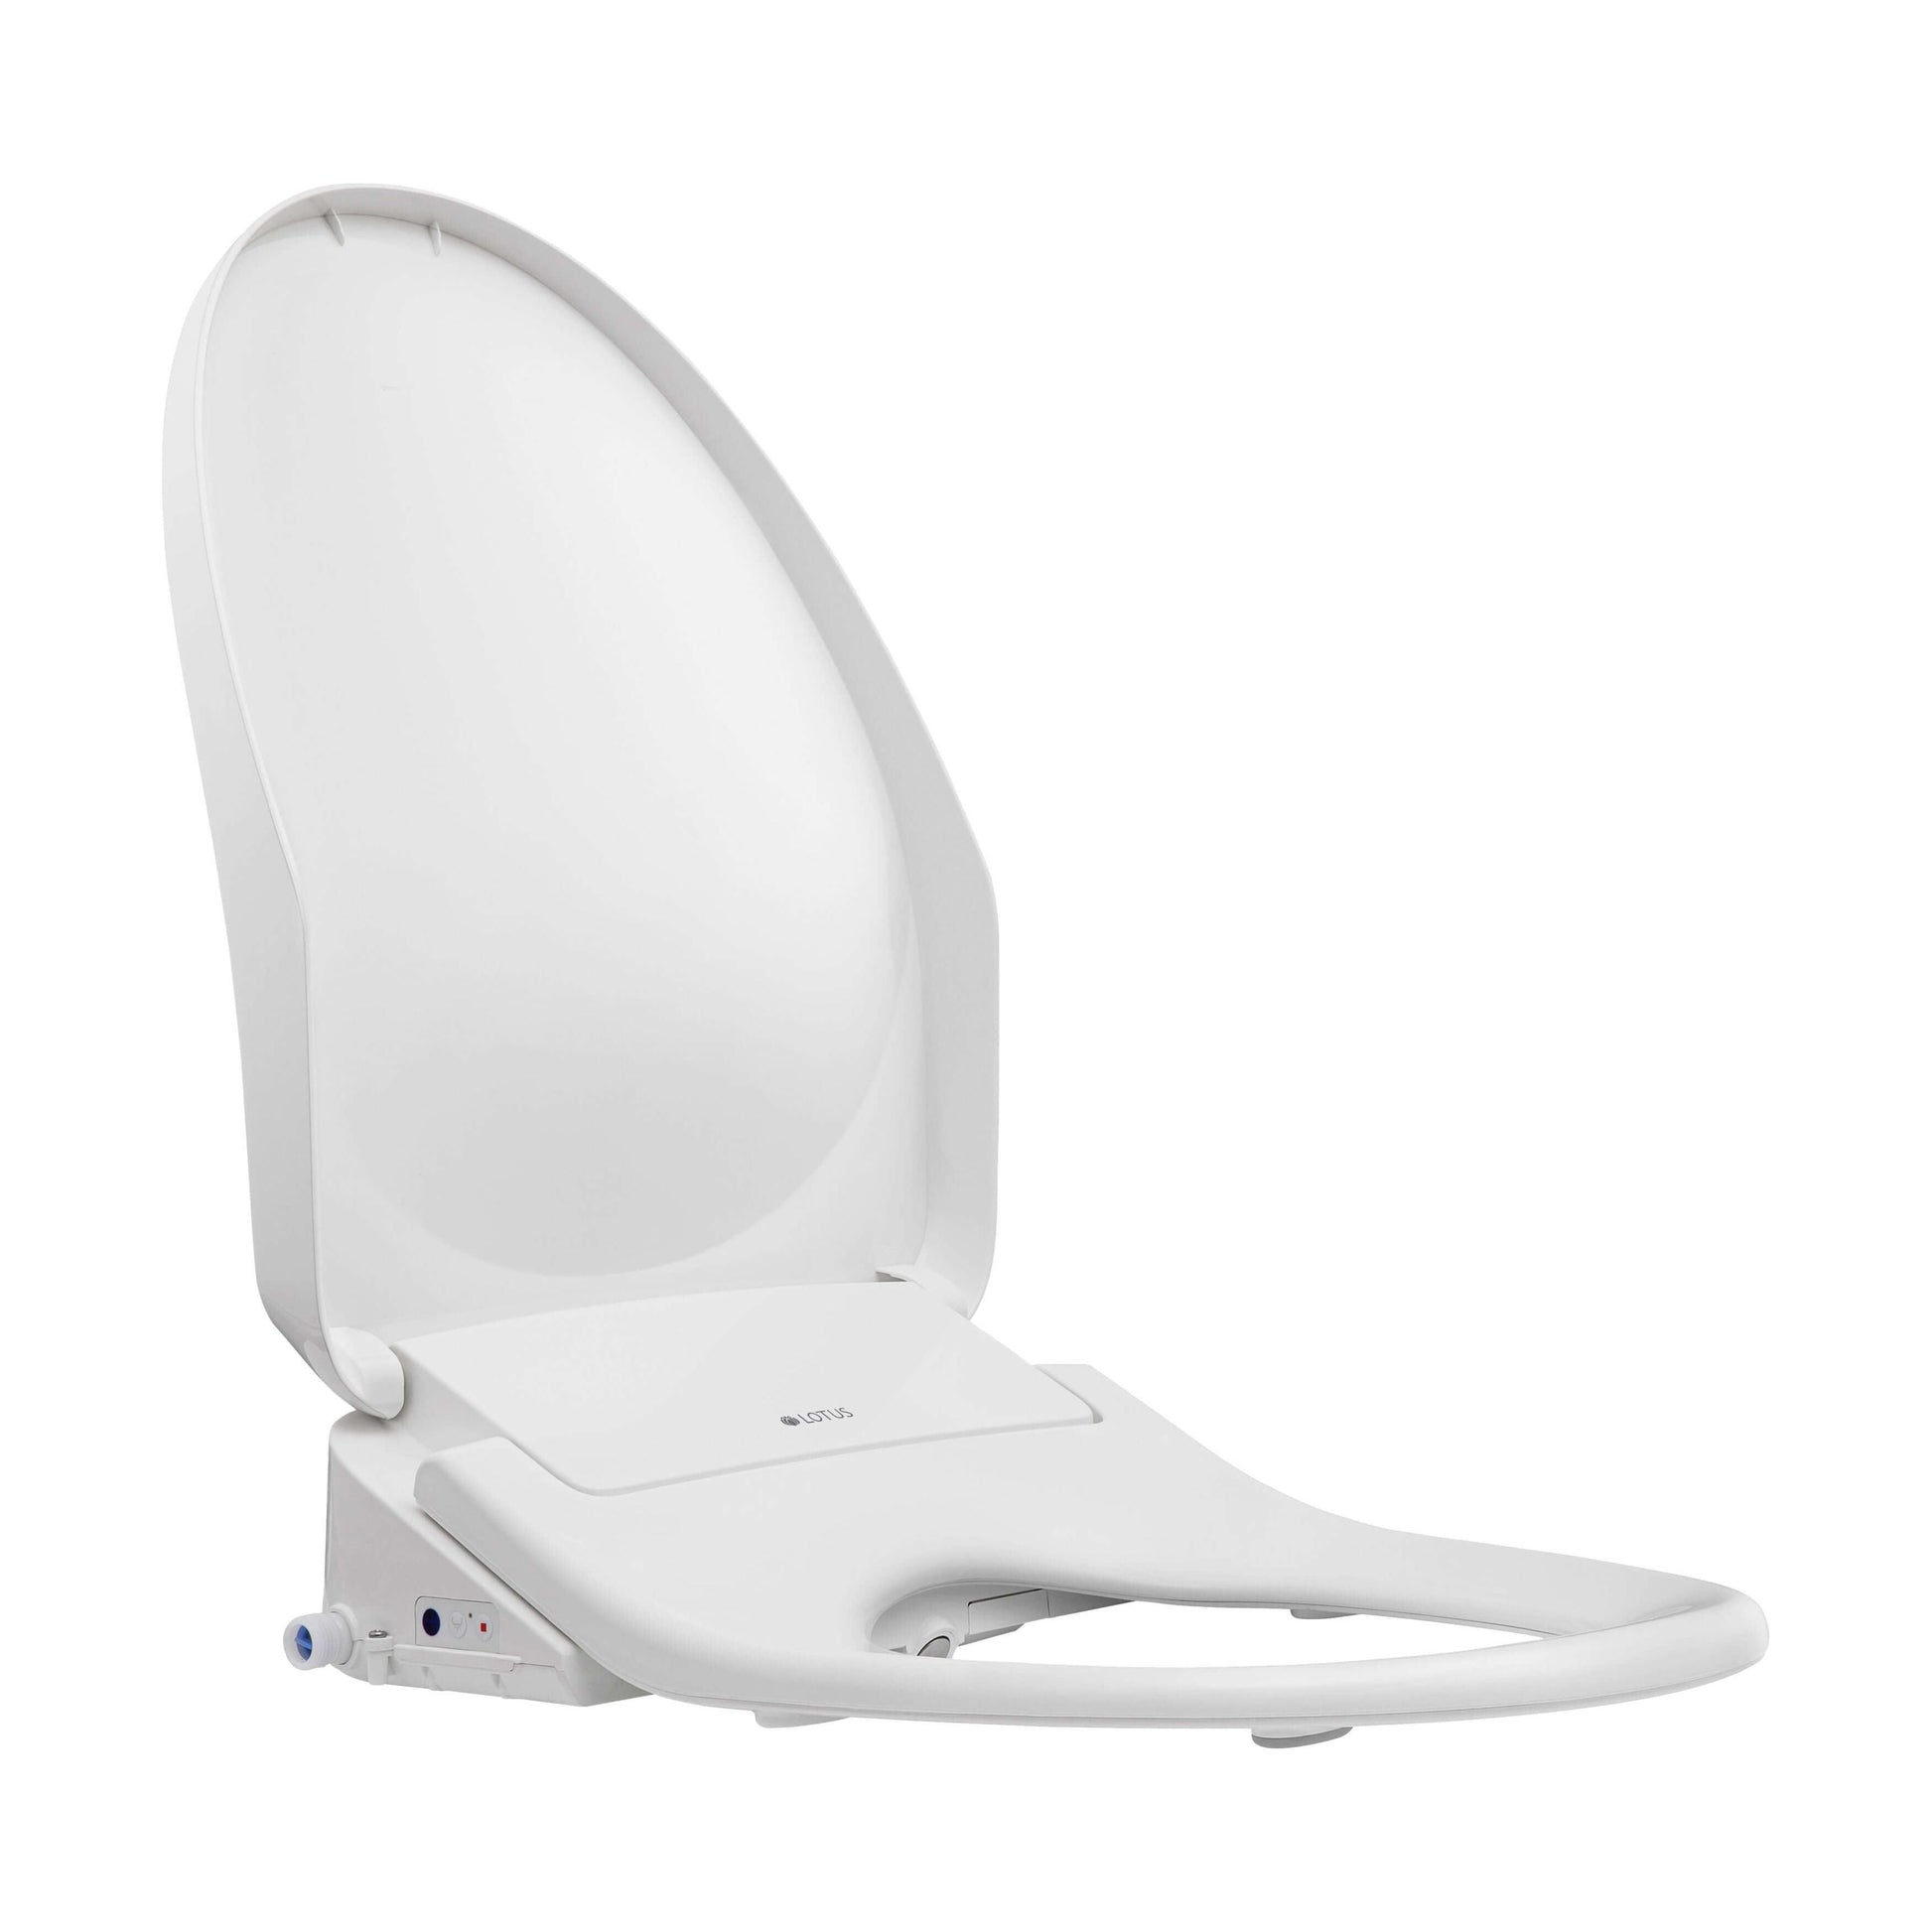 Lotus Bidet Seat ATS-850R - side angled view with lid open